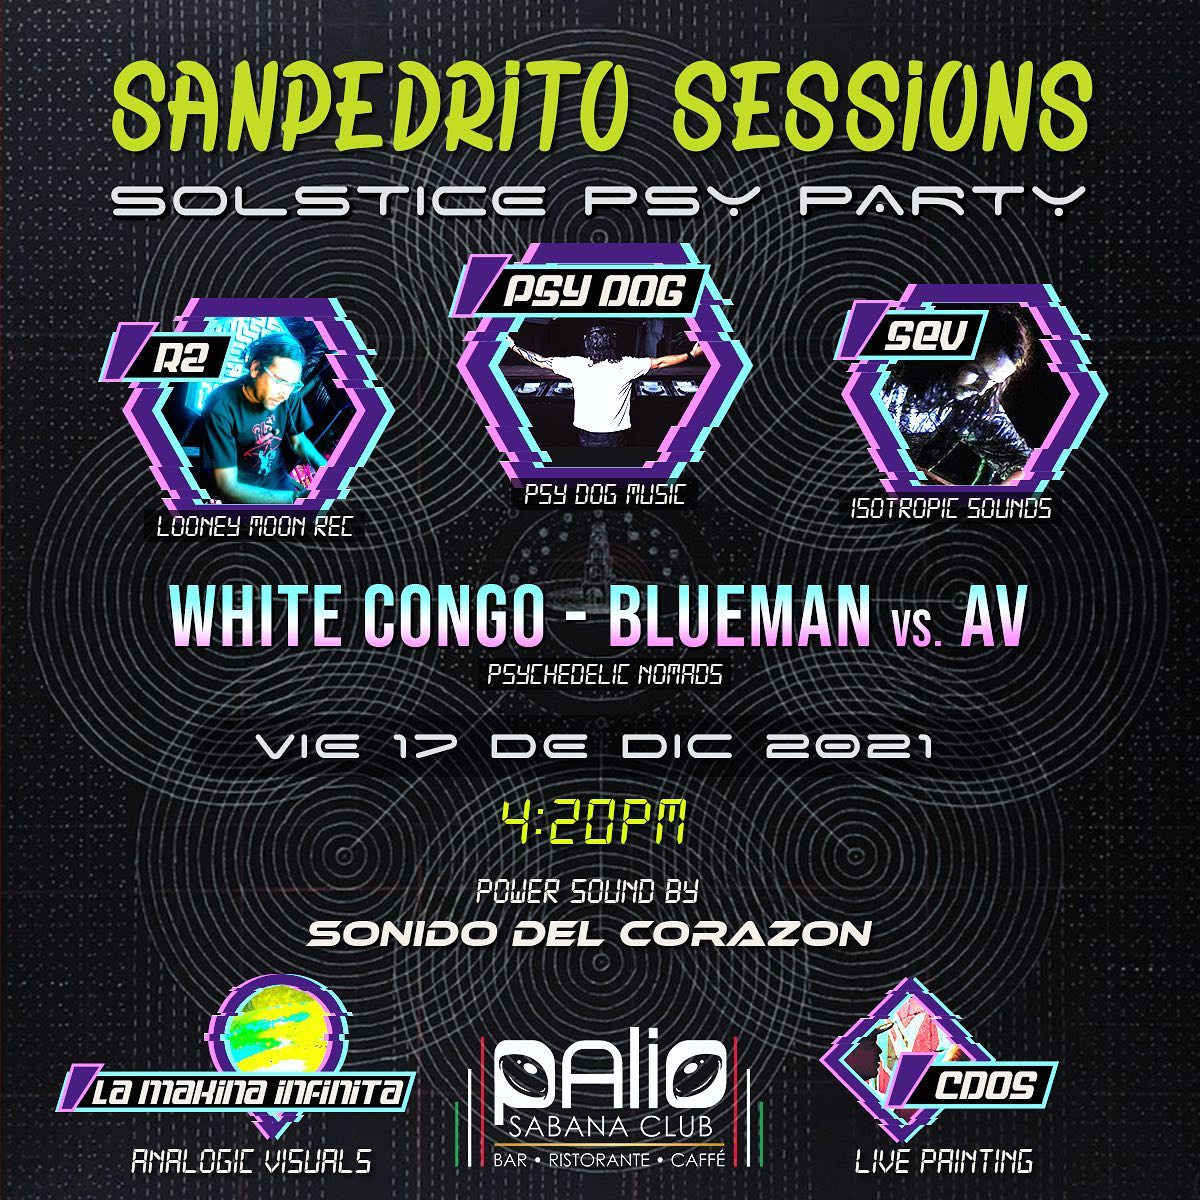 SAN PEDRITO SESSIONS, Solstice Psy Party